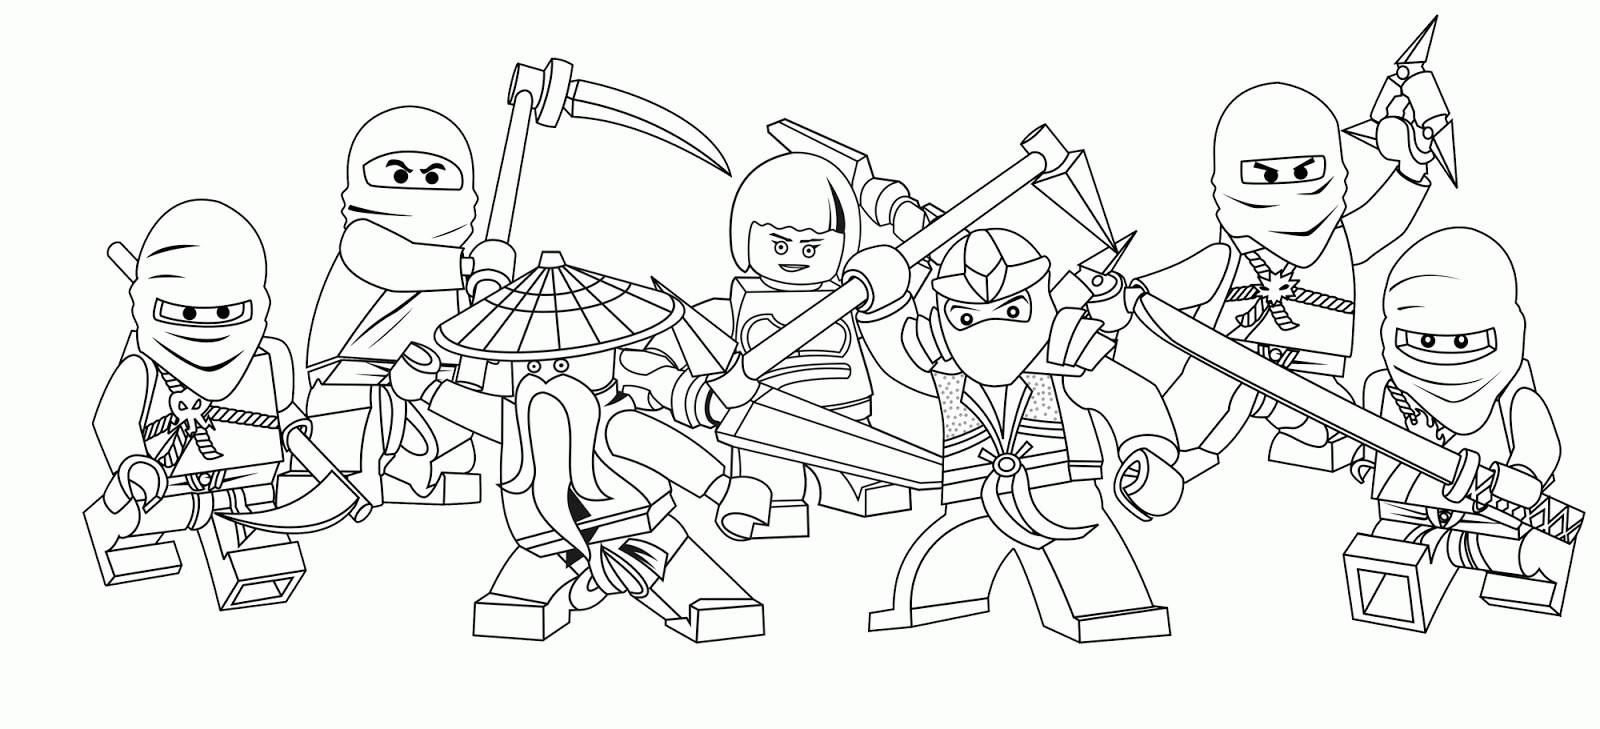 Lego Ninjago Ninja Coloring Pages - High Quality Coloring Pages